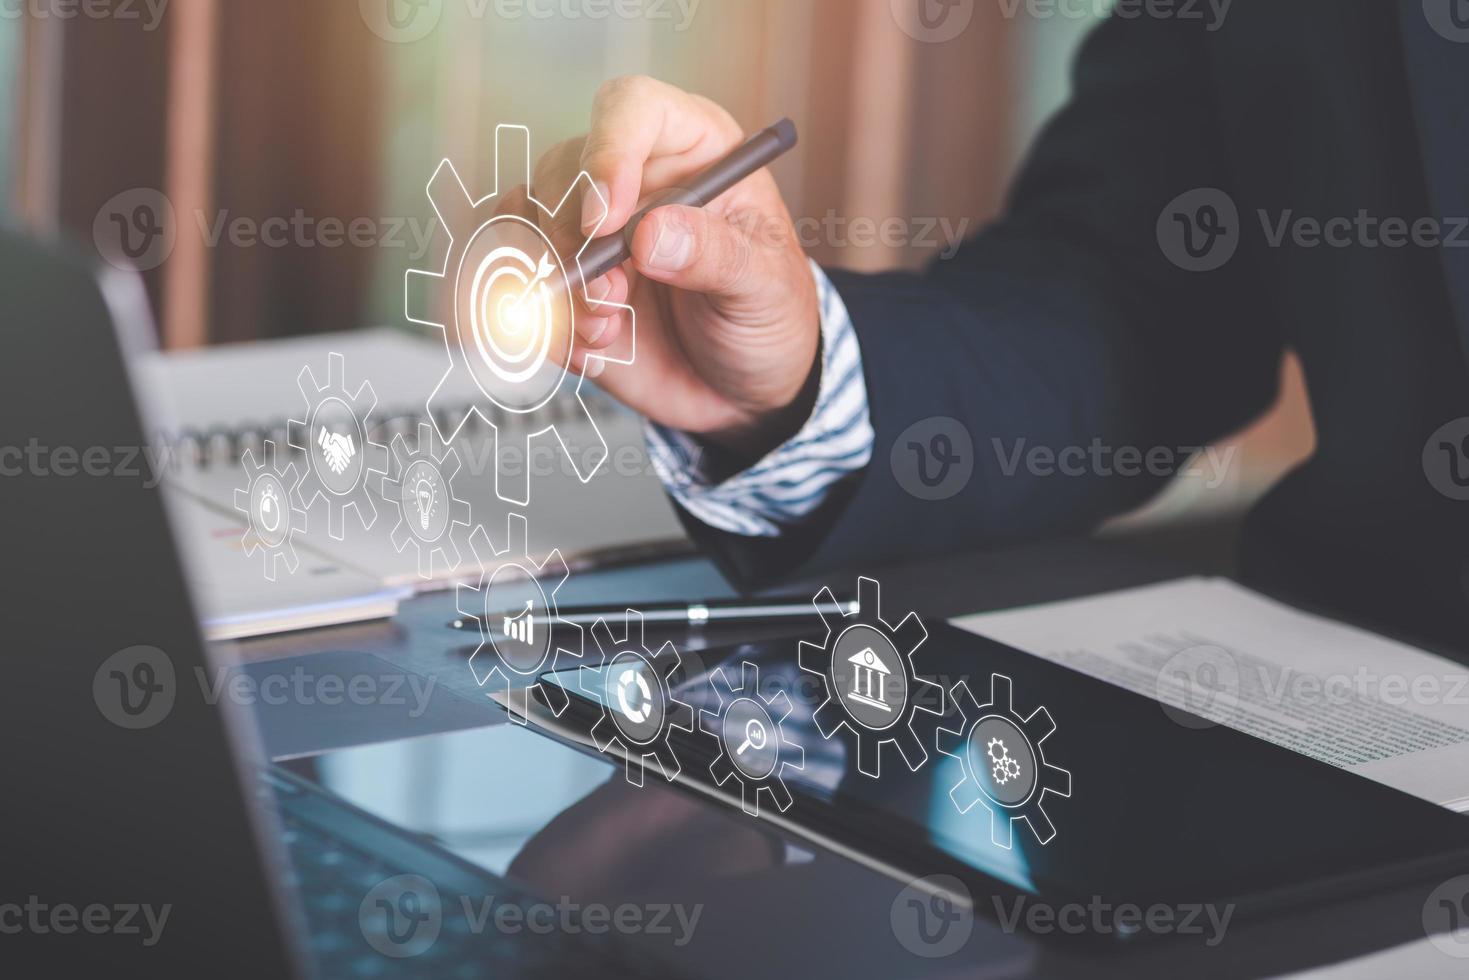 Businessman pointing pen at icon, goal setting ideas and business strategies. through planning and teamwork To analyze and develop company performance from growth data to the future. photo